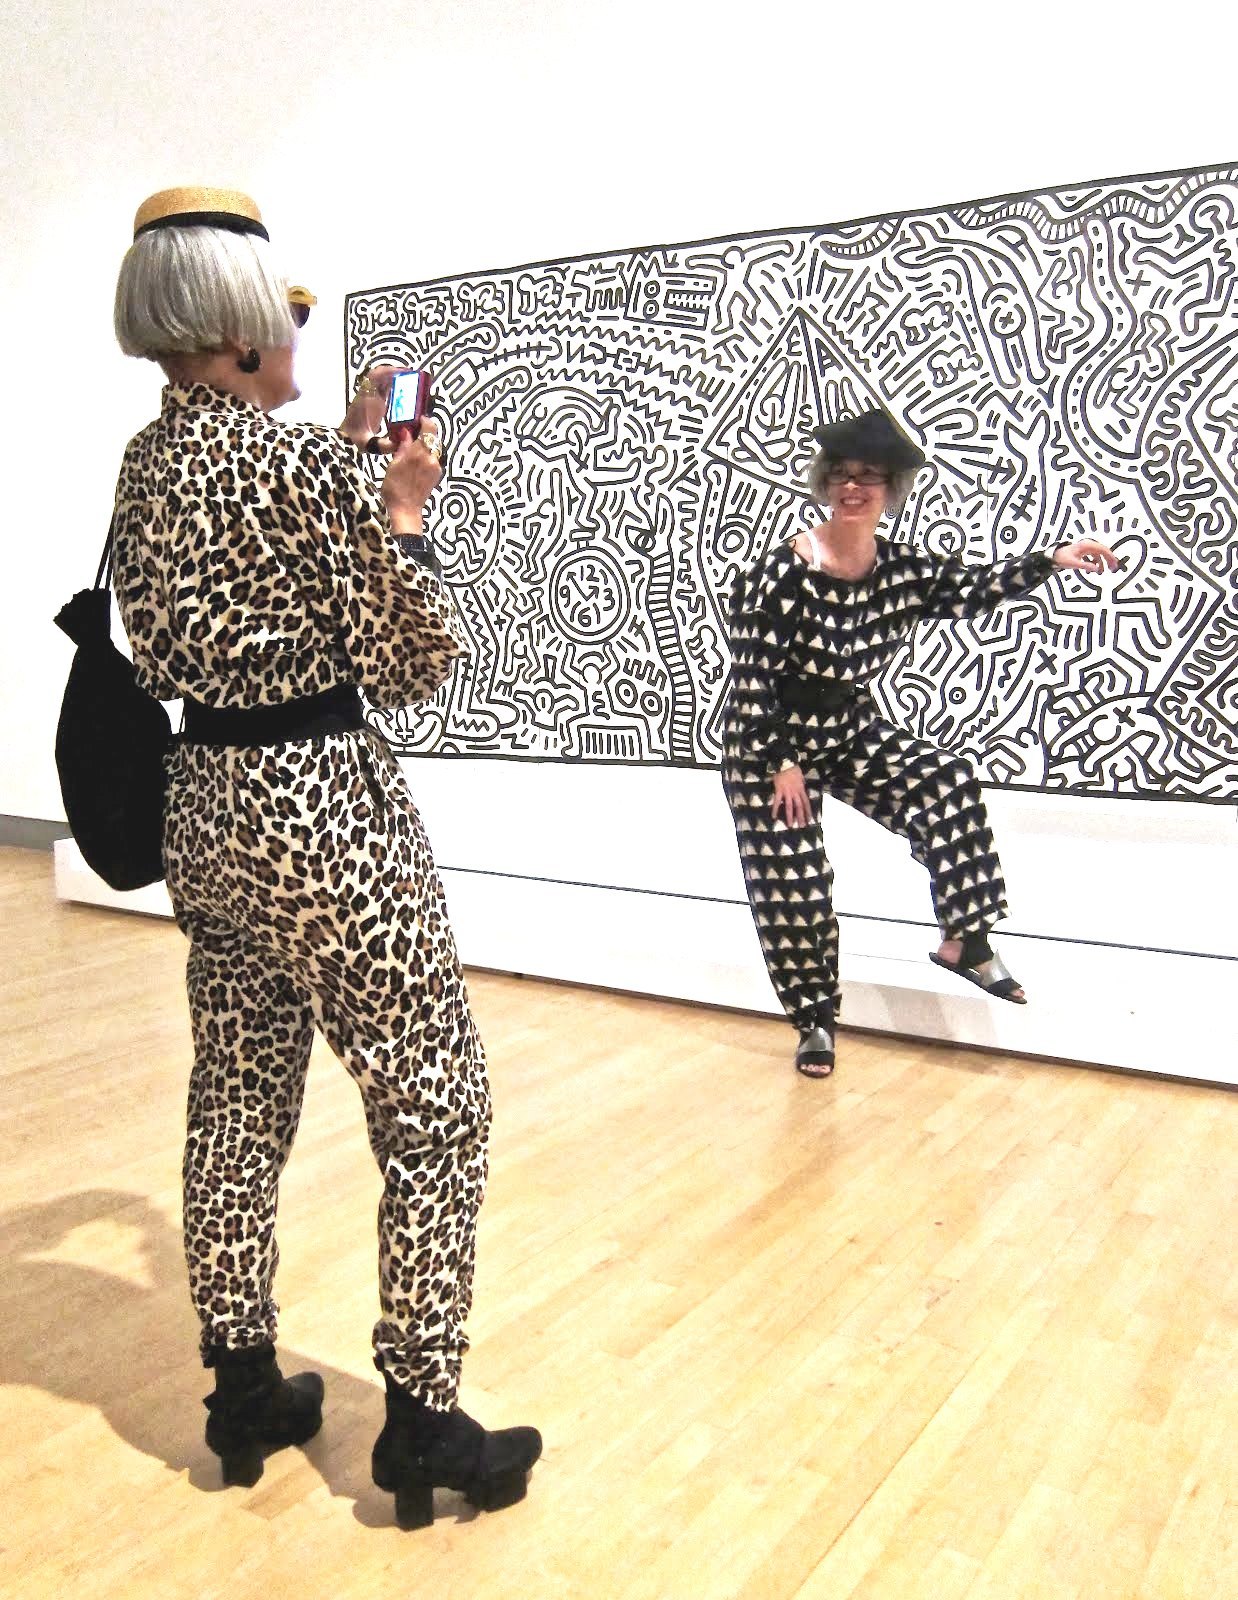 123artblog:

i always wanted to dress up like fullbody as an leopard and go to moma and have photo fun in front of artworks with my twin..
